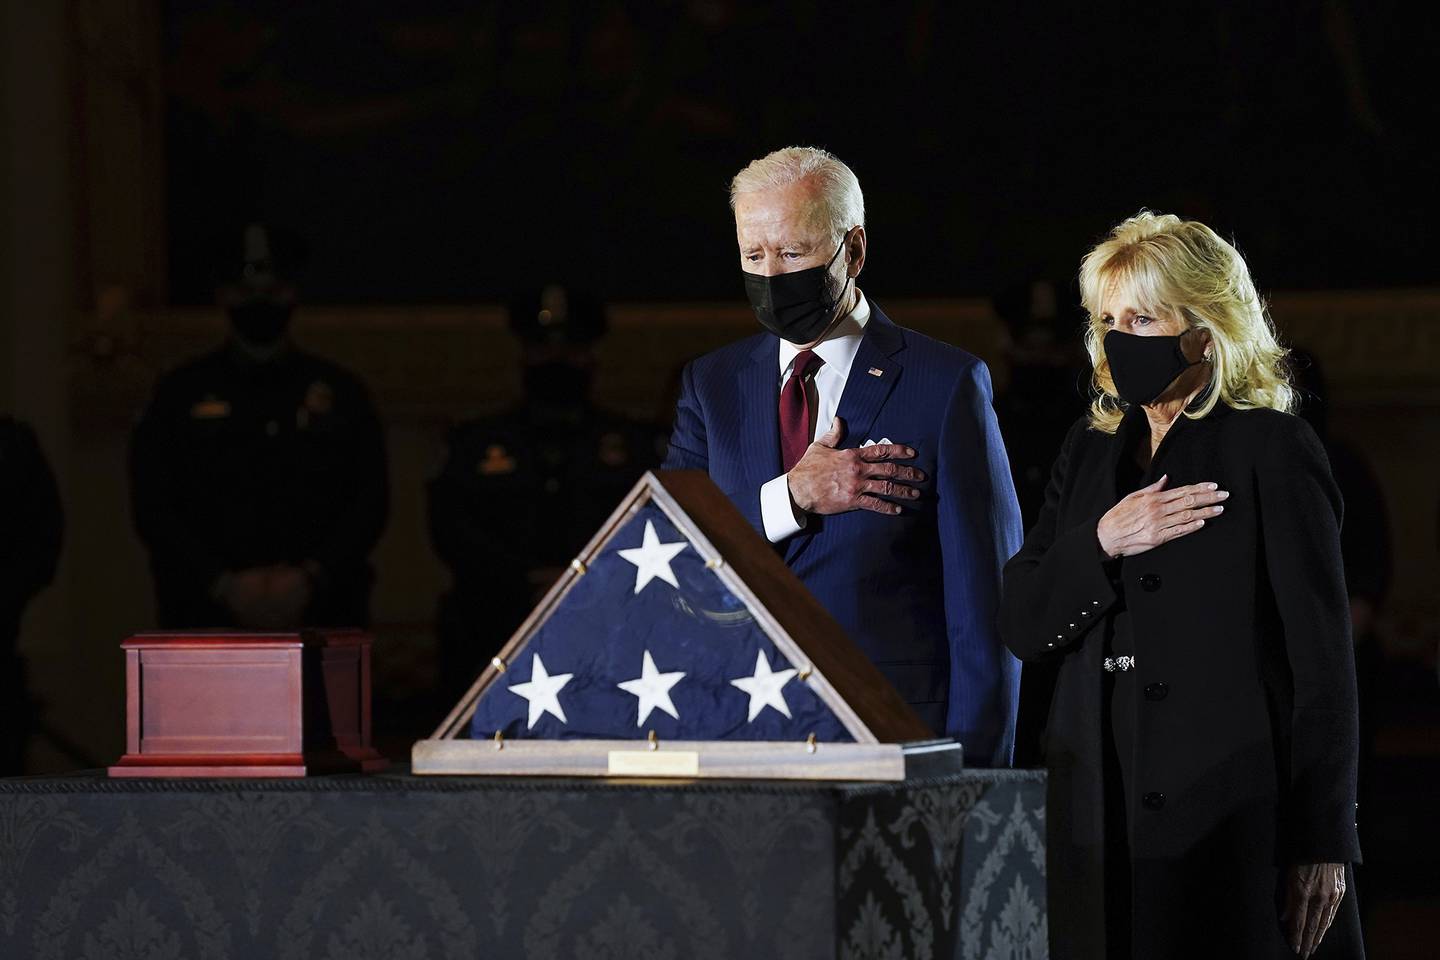 President Joe Biden and first lady Jill Biden pay their respects to the late U.S. Capitol Police officer Brian Sicknick as an urn with his cremated remains lies in honor on a black-draped table at center of Capitol Rotunda, Tuesday, Feb. 2, 2021, in Washington.